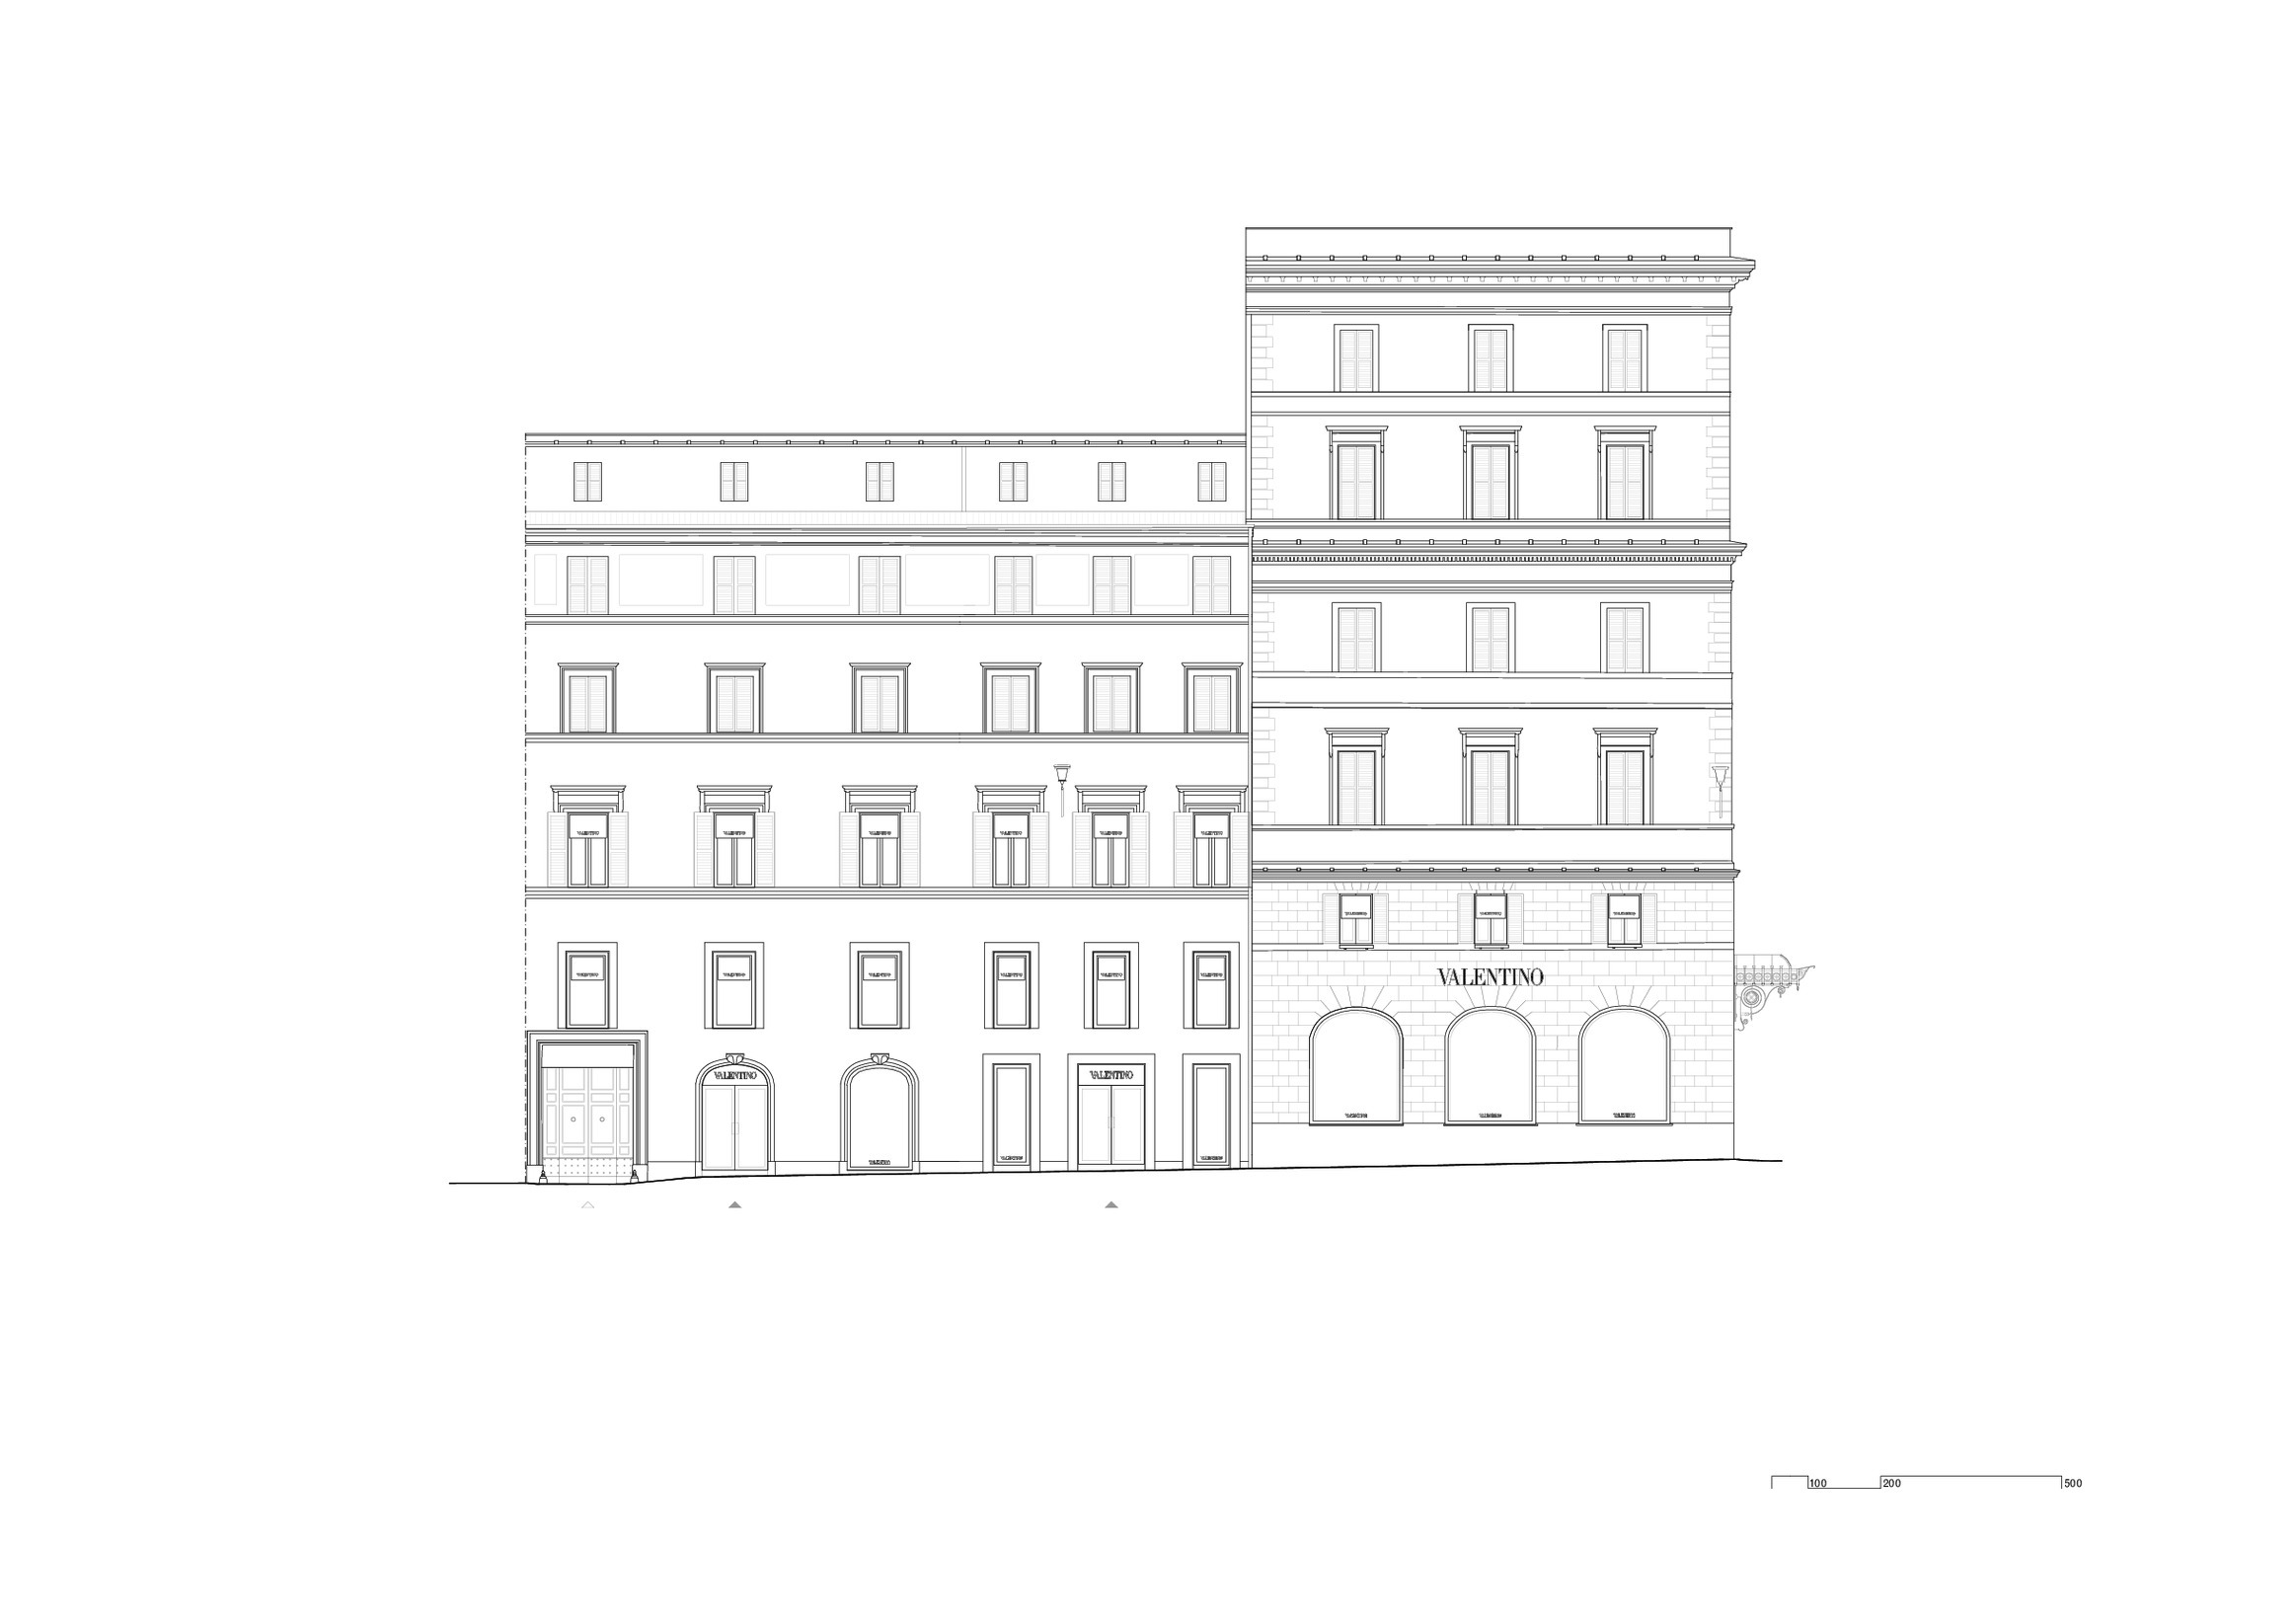 Valentino Flagship Store in Rome, Piazza di Spagna, South West elevation.